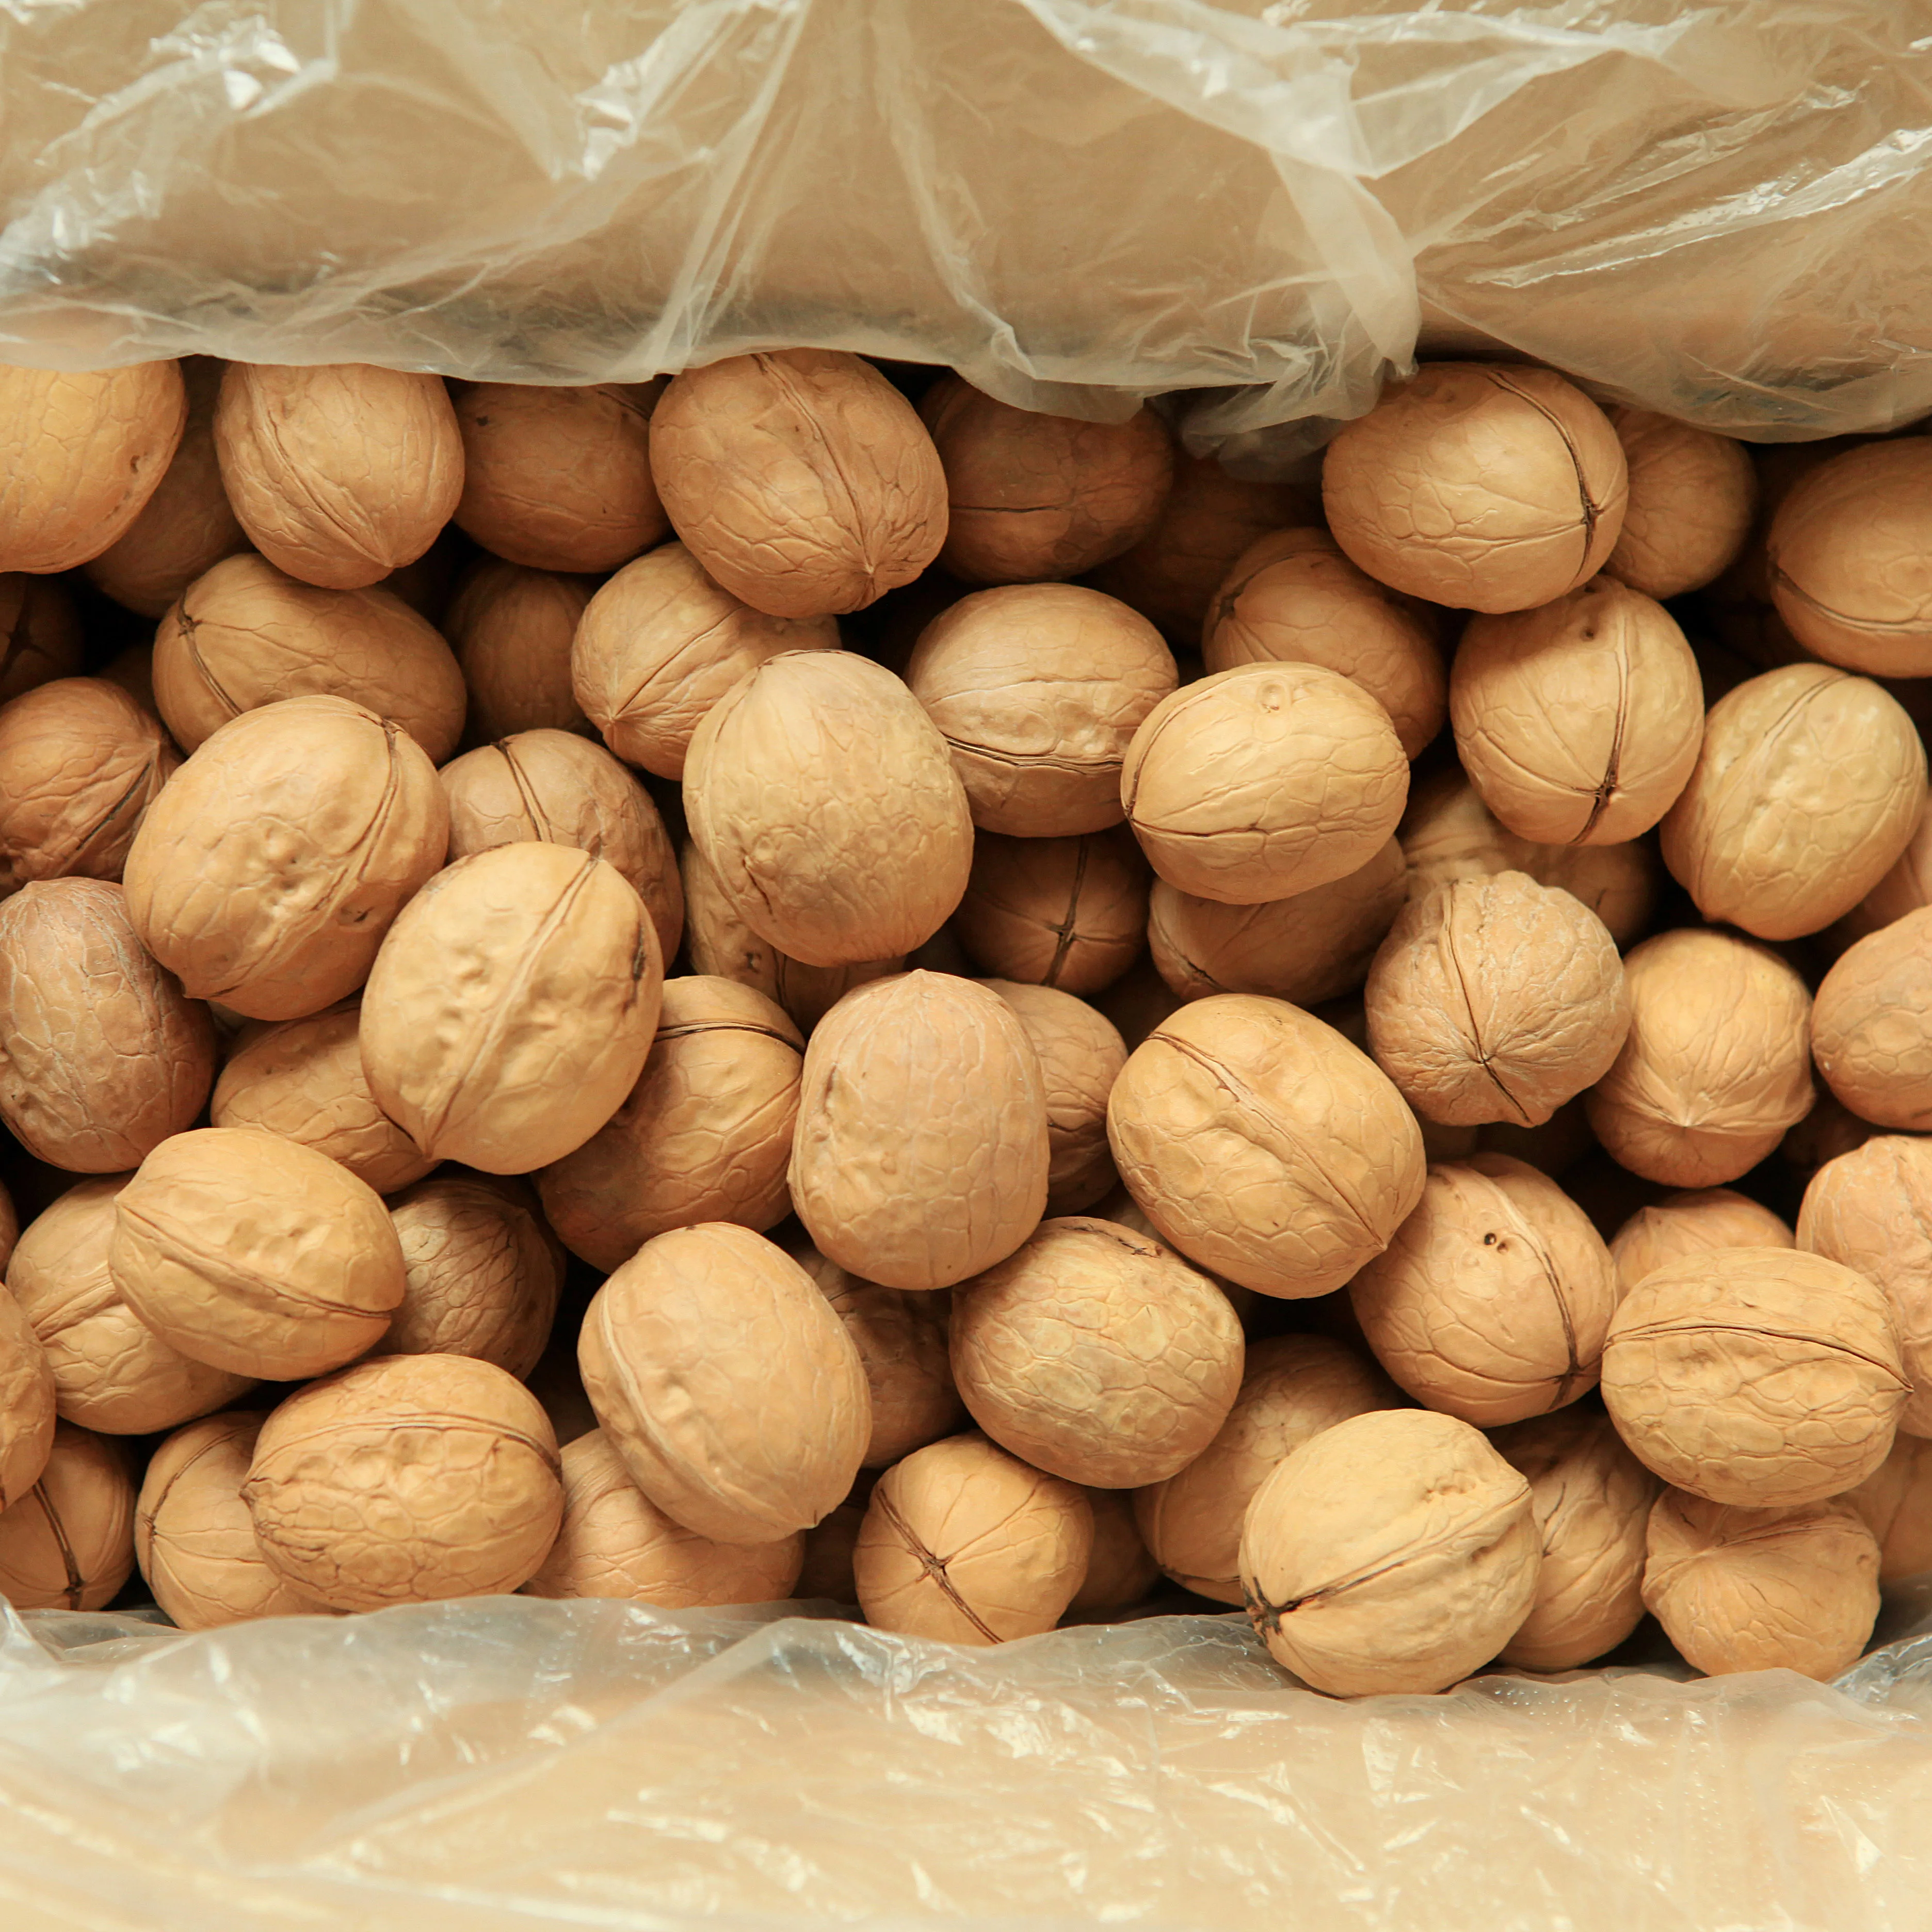 Whole walnuts in shell for sale